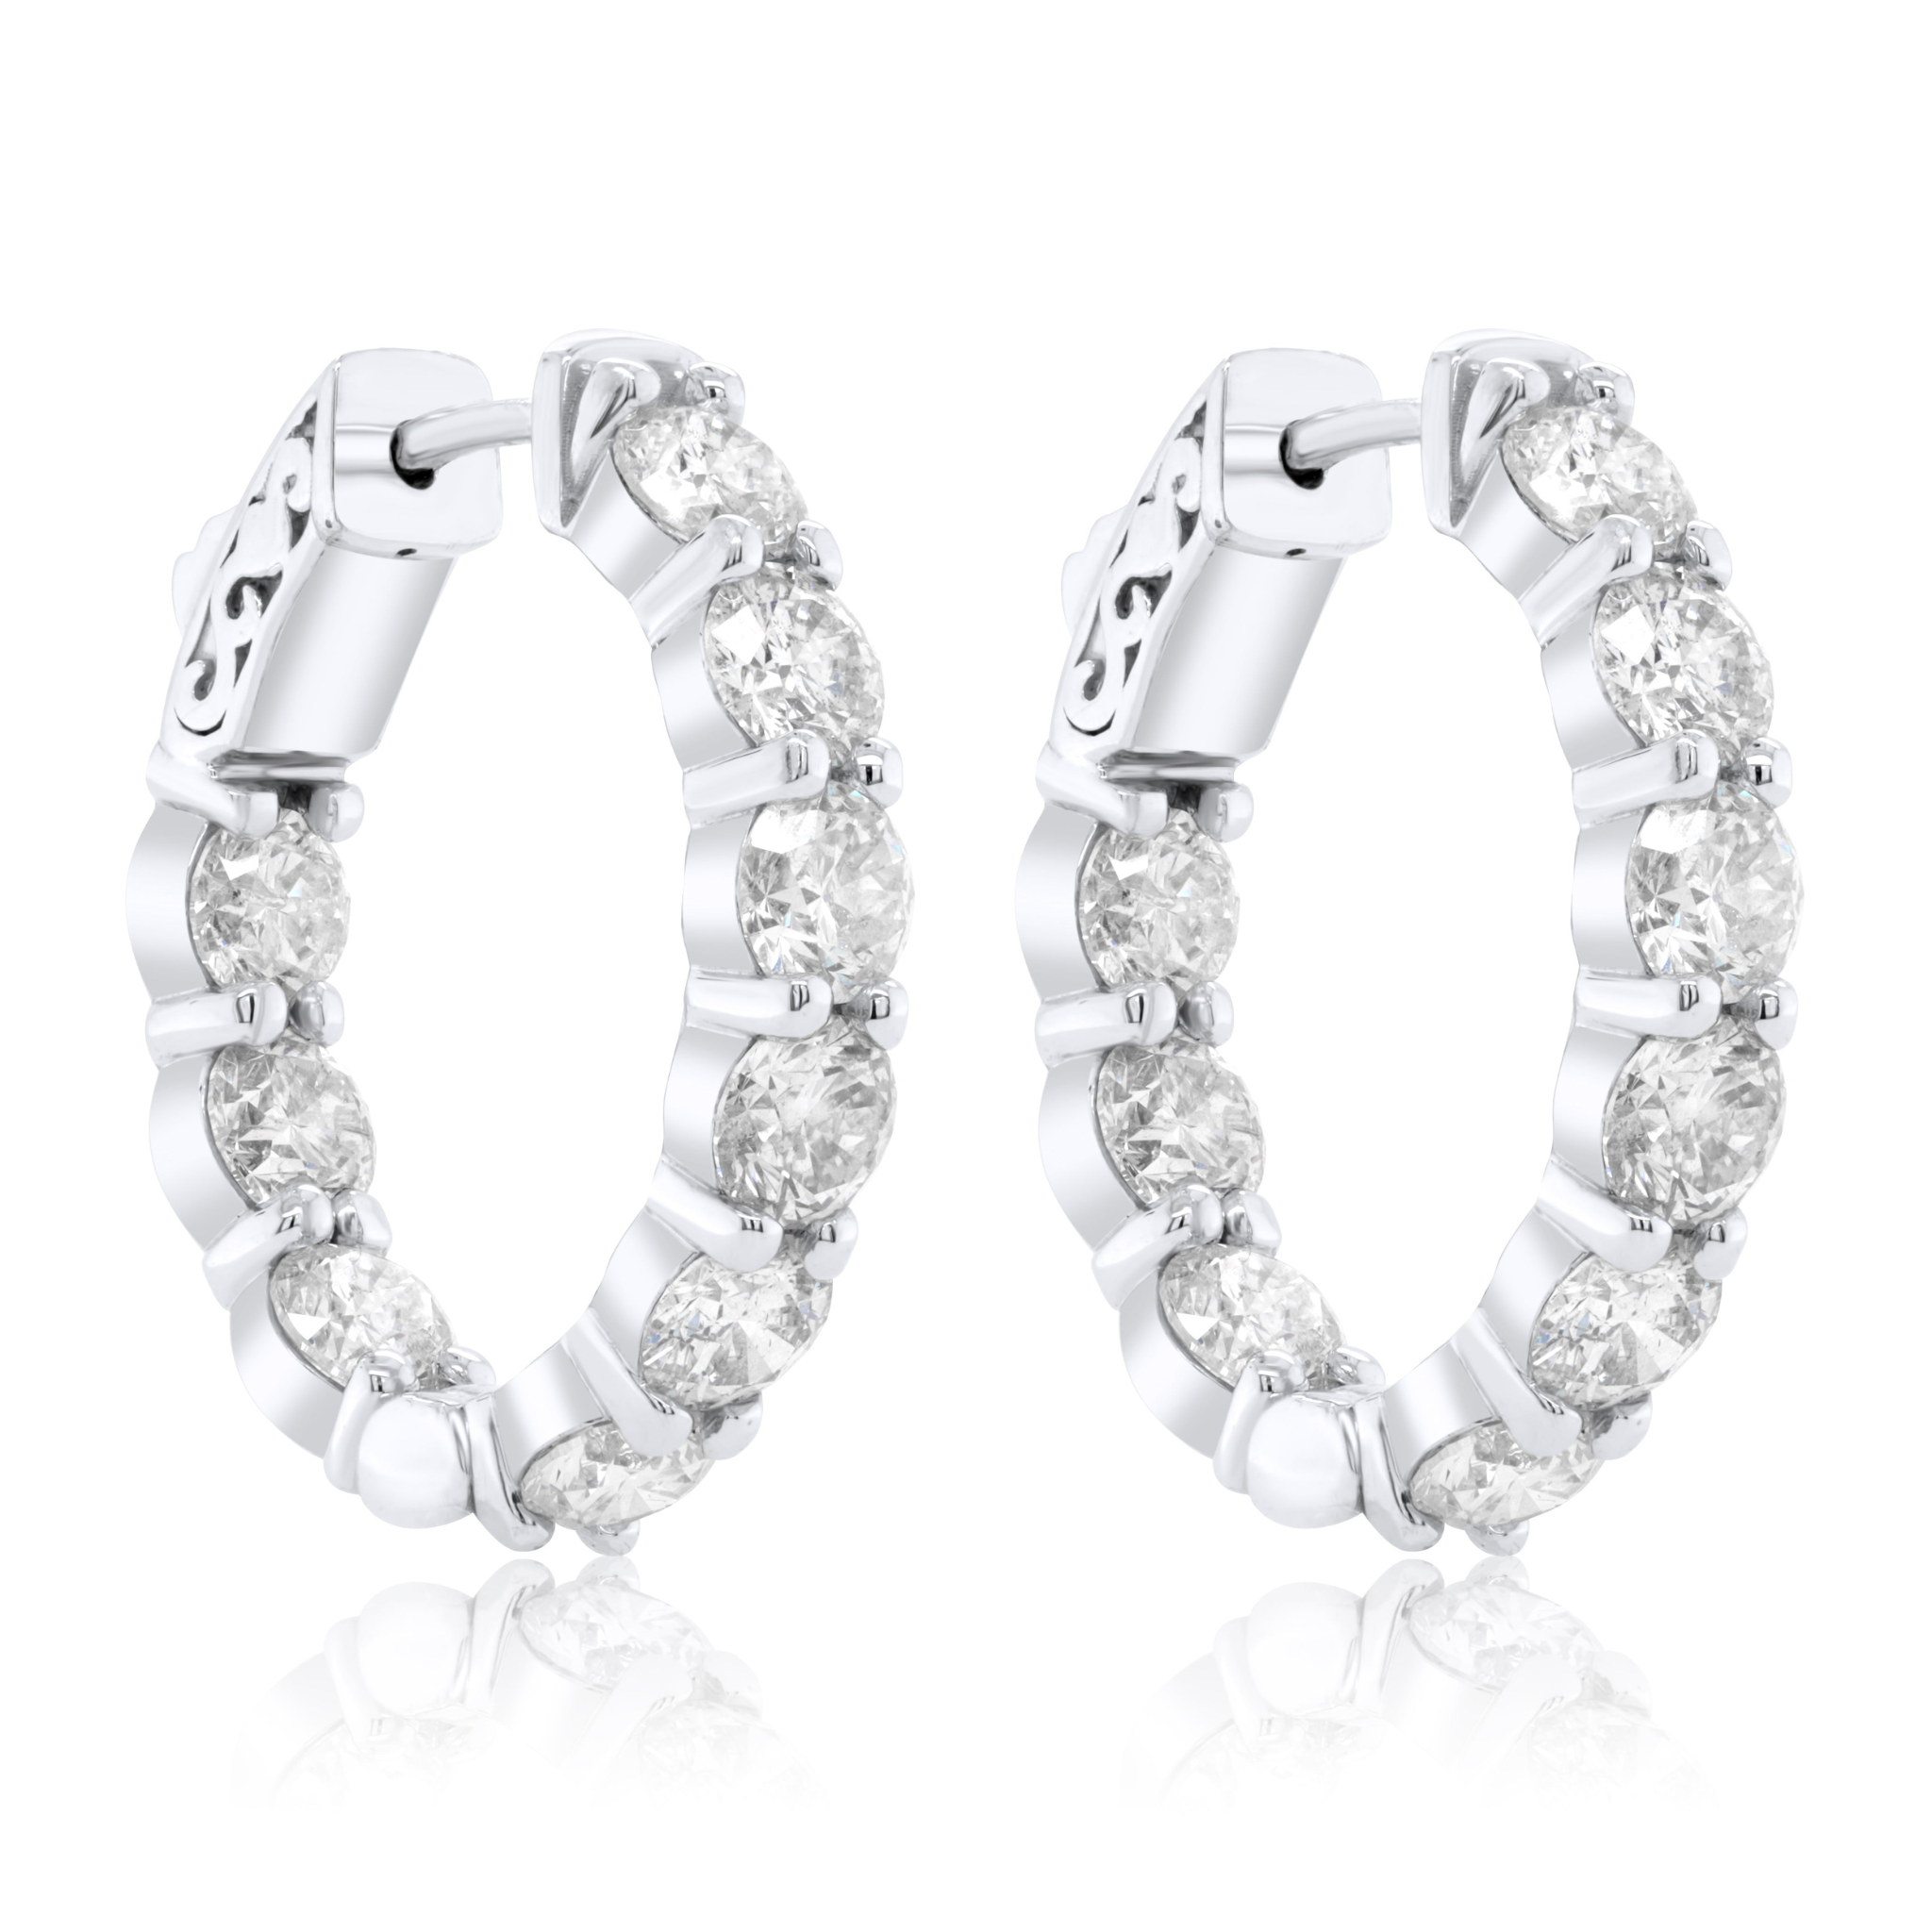 14 Kt White Gold 0.75" Hoop Earrings with 9.05 cts.jpg